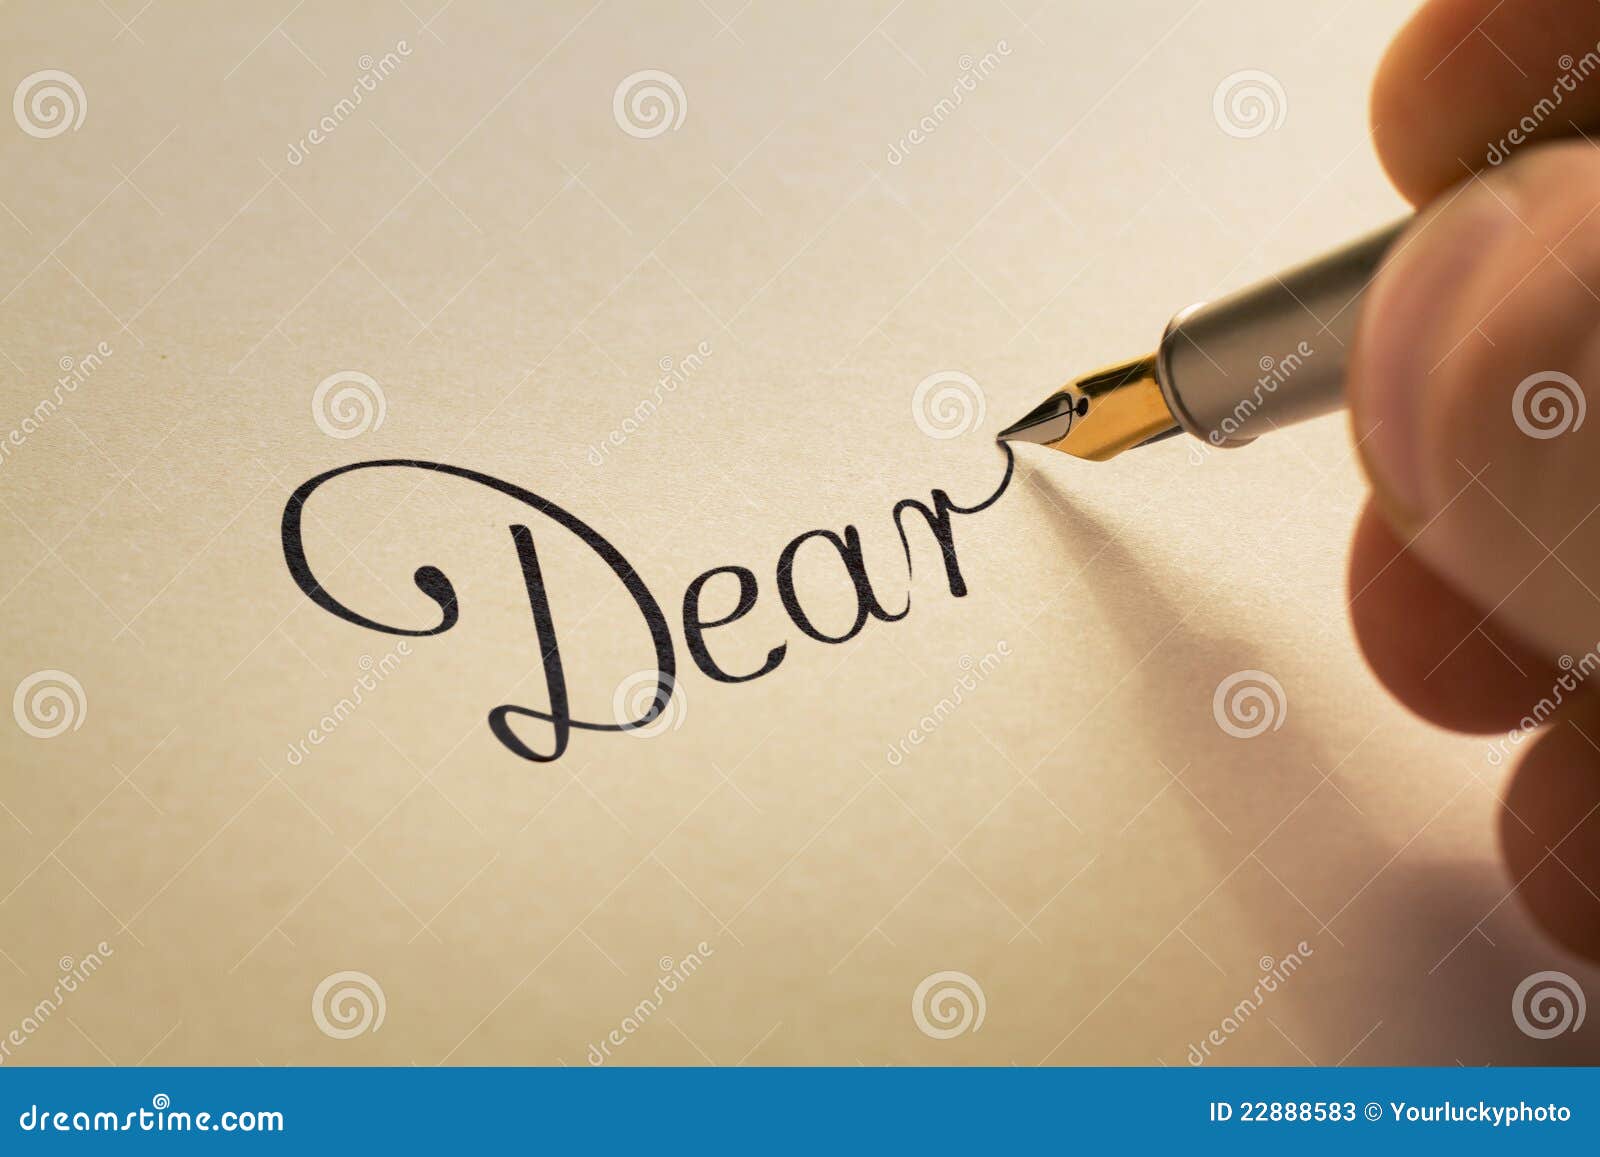 handwriting letter with pen